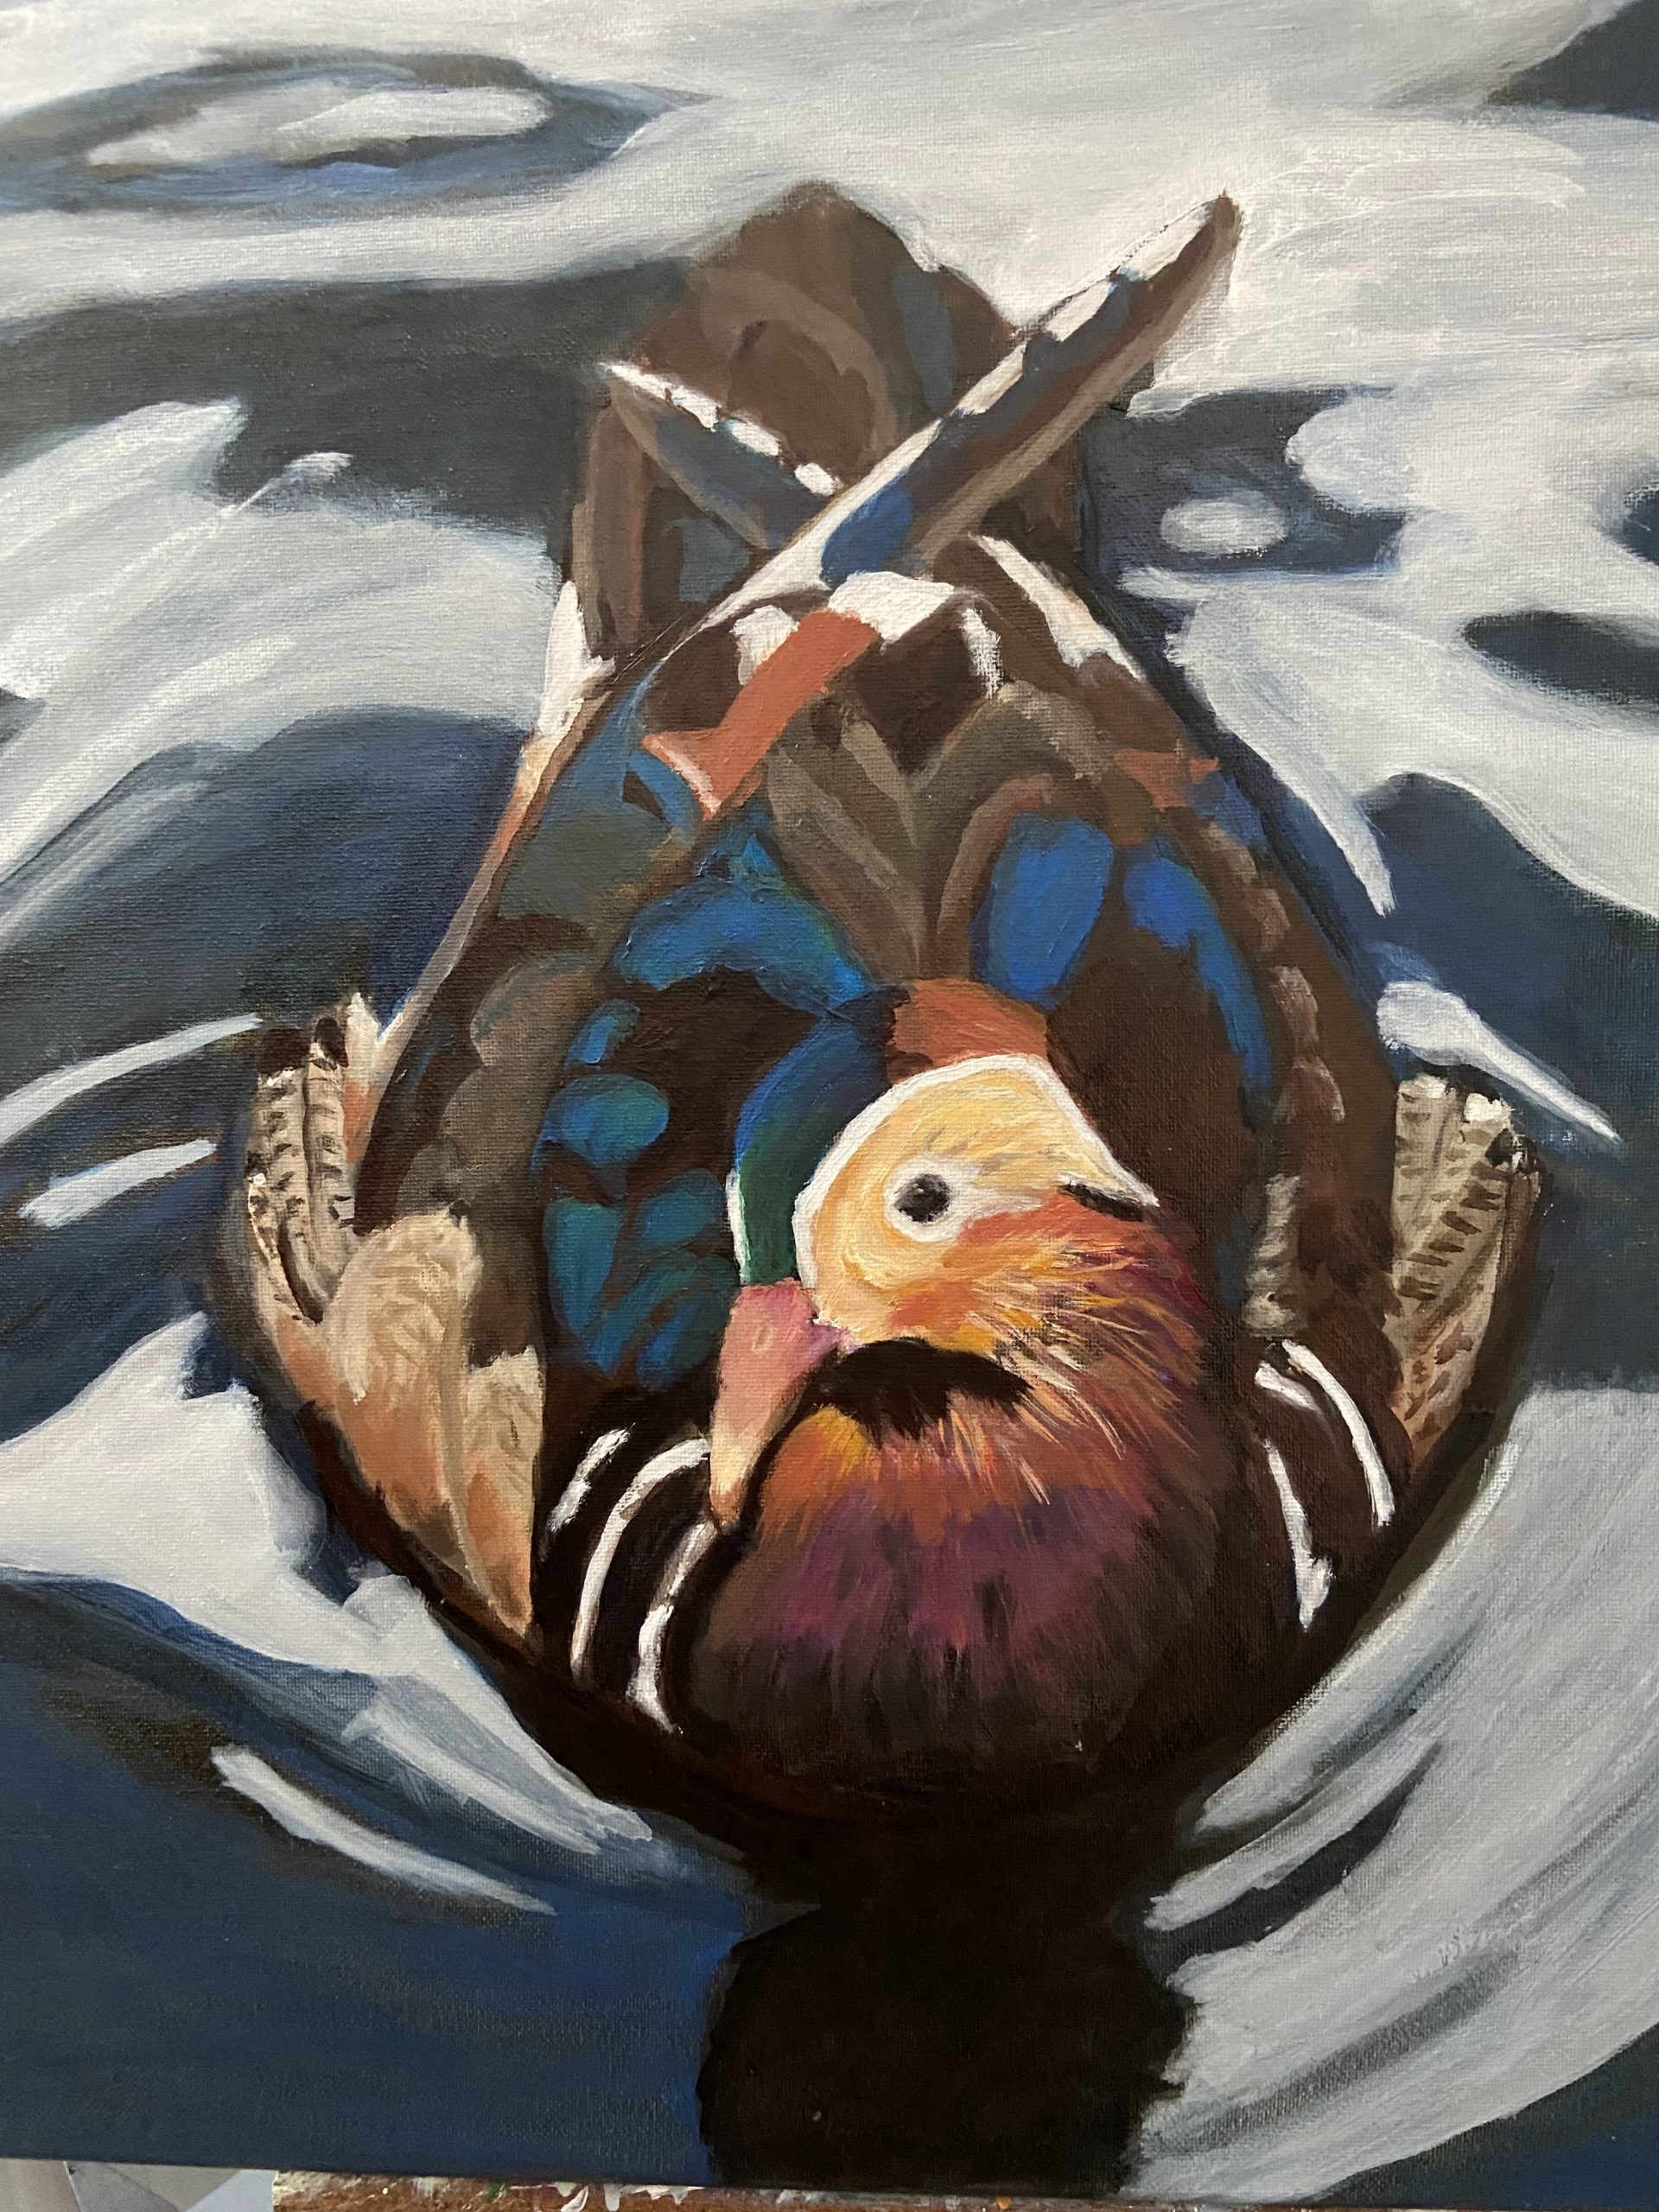 Painting of a Mandaring duck